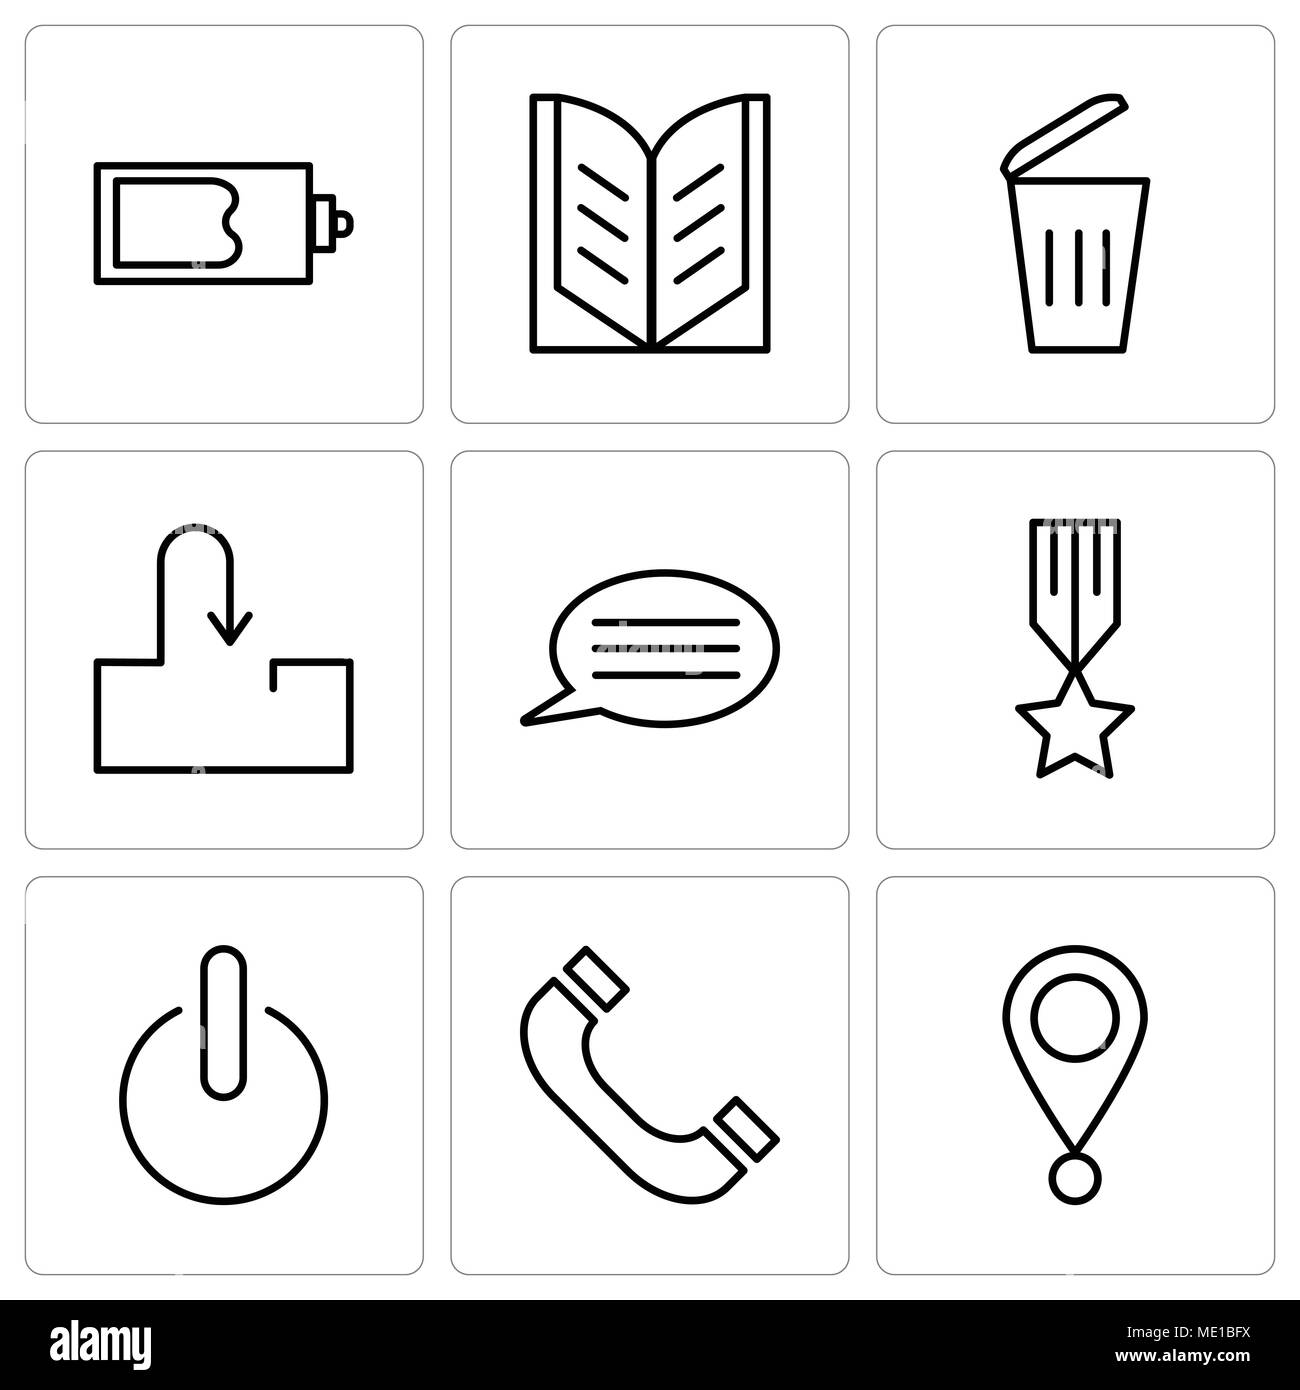 Set Of 9 simple editable icons such as Location pointer, Headphones, Power button, Medal with a star, Speech bubble with text, Inbox, Dustbin, Open bo Stock Vector